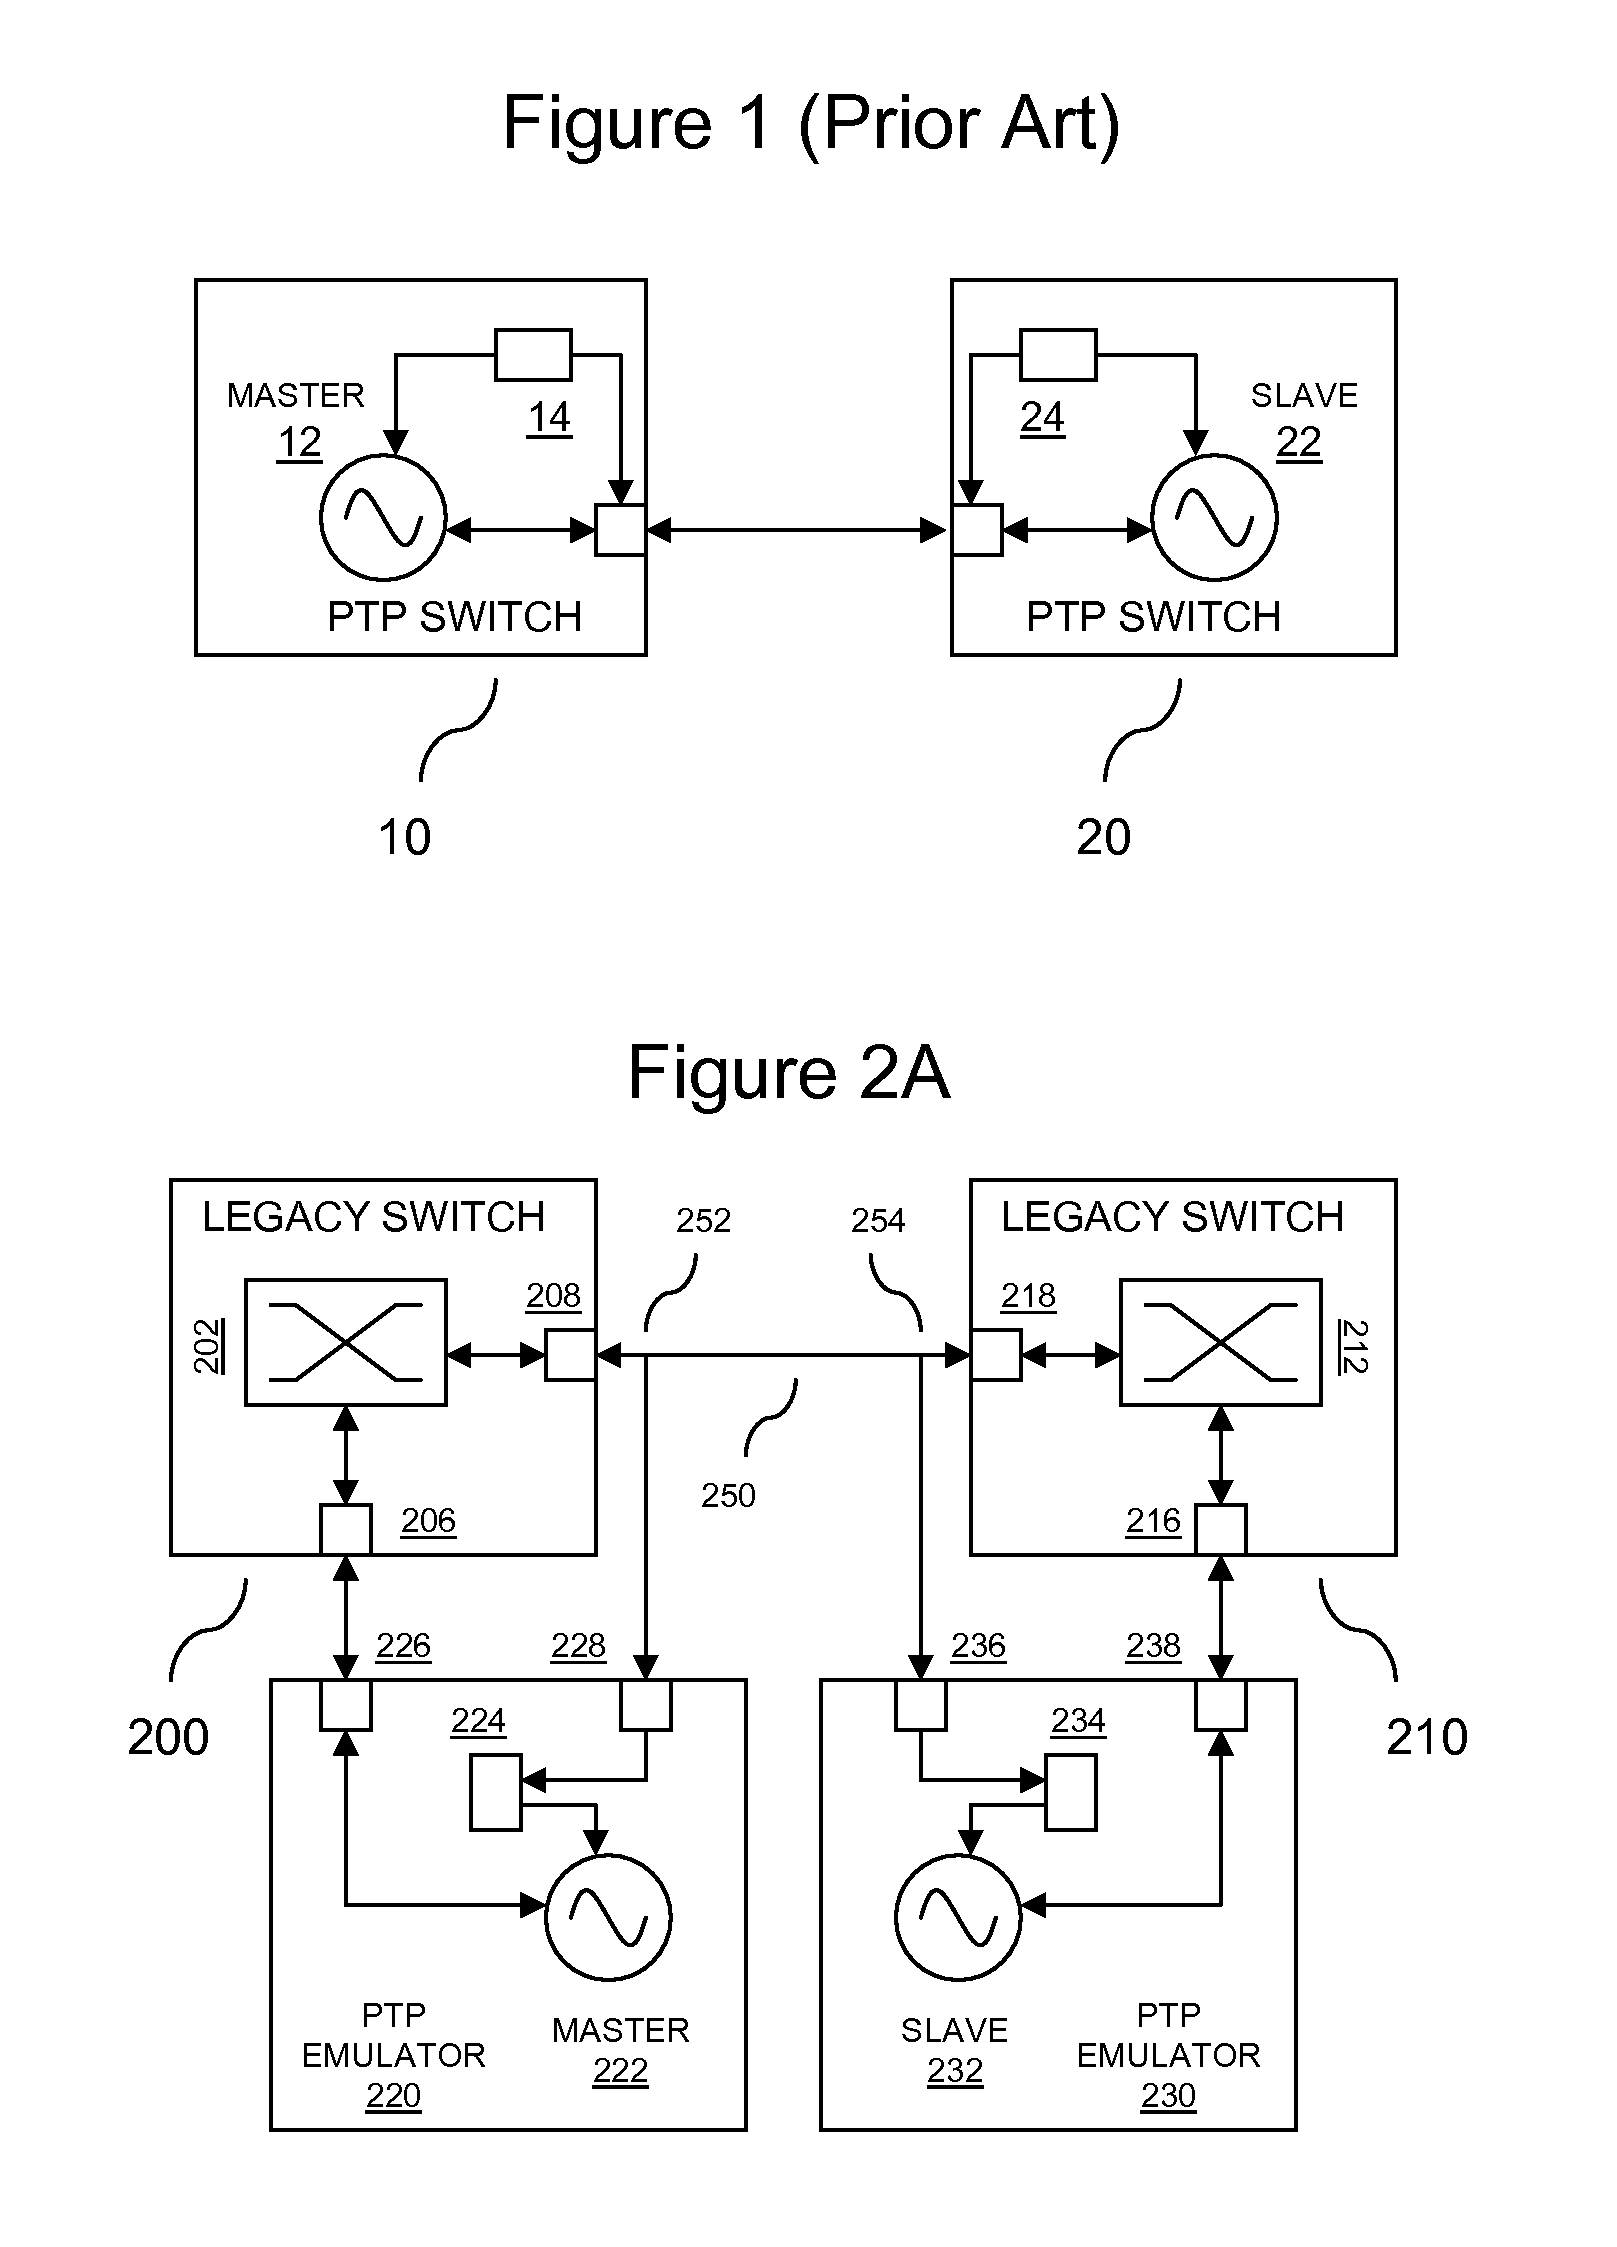 Precision Time Protocol Emulation for Network Supportive of Circuit Emulation Services